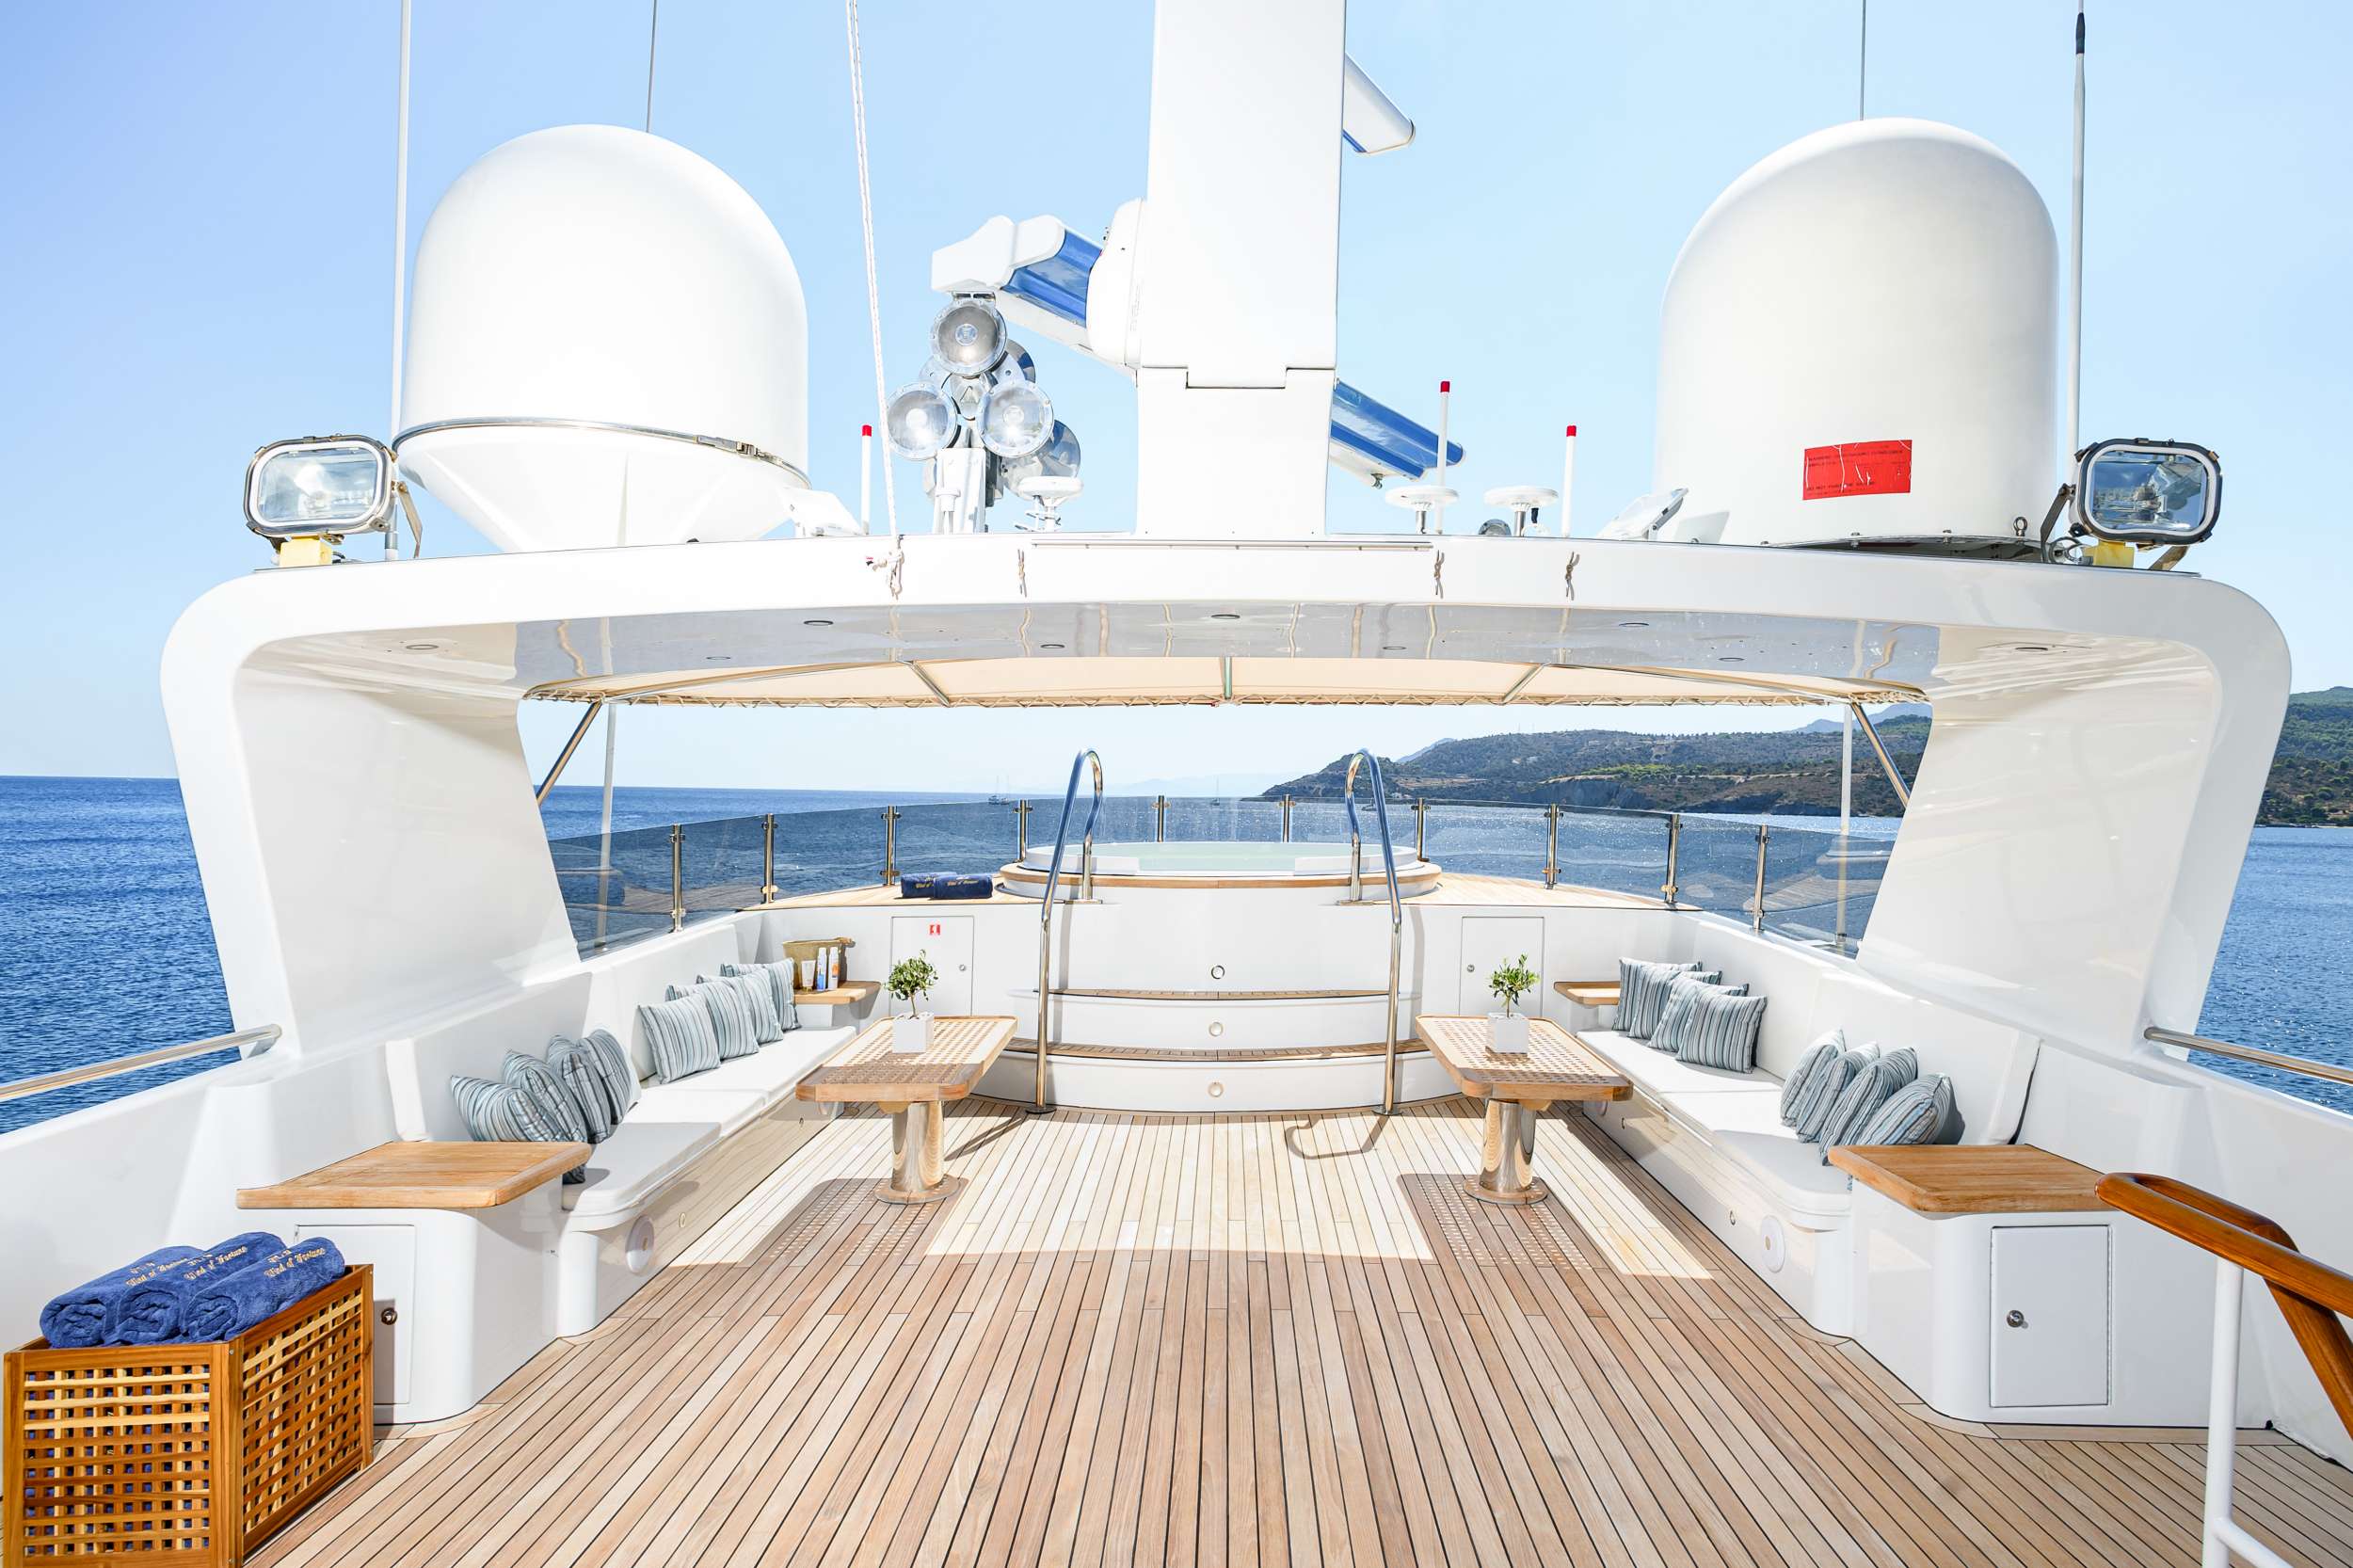 WIND OF FORTUNE - Motor Boat Charter Seychelles & Boat hire in Summer: W. Med -Naples/Sicily, Greece, W. Med -Riviera/Cors/Sard., Turkey, W. Med - Spain/Balearics, Croatia | Winter: Indian Ocean and SE Asia, Red Sea, United Arab Emirates 5